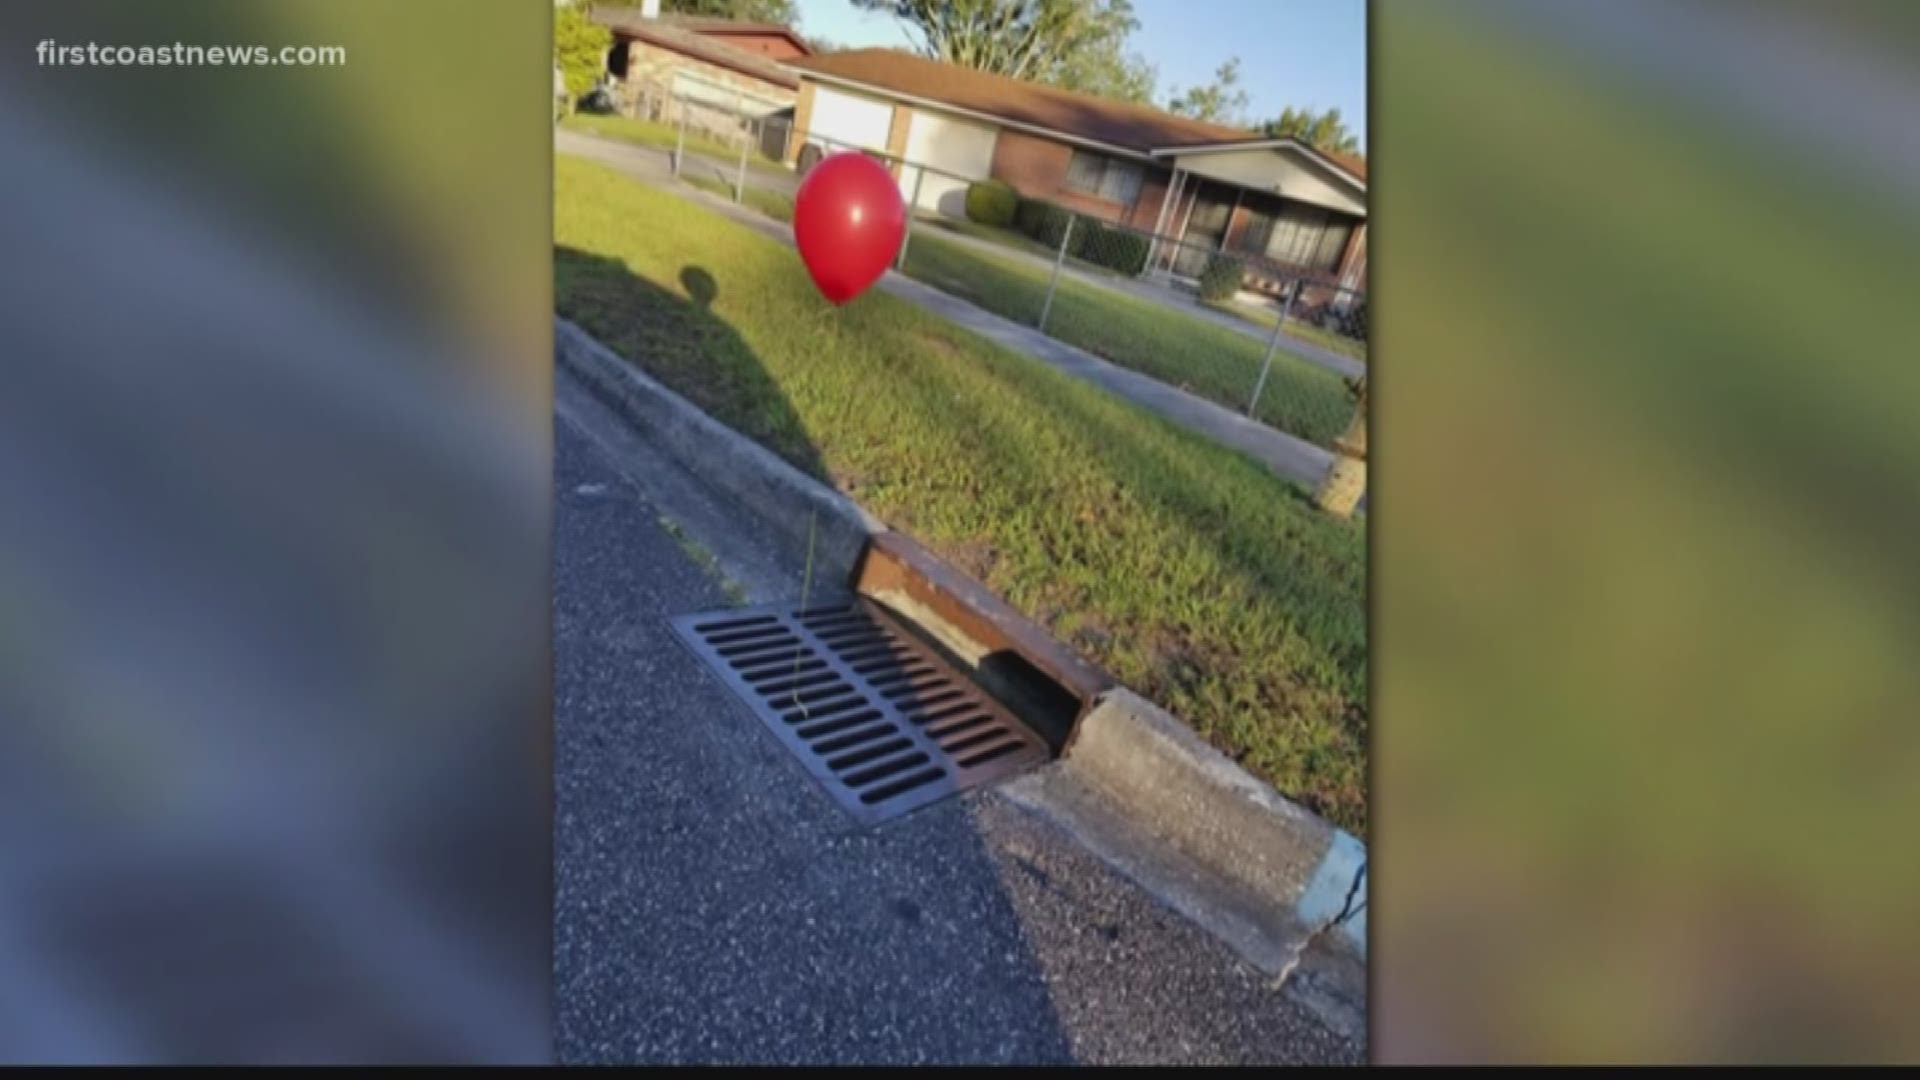 Someone is tying red balloons to sewer grates and it's hilarious and terrifying. If you've seen Stephen King's 'IT' you'll understand why.